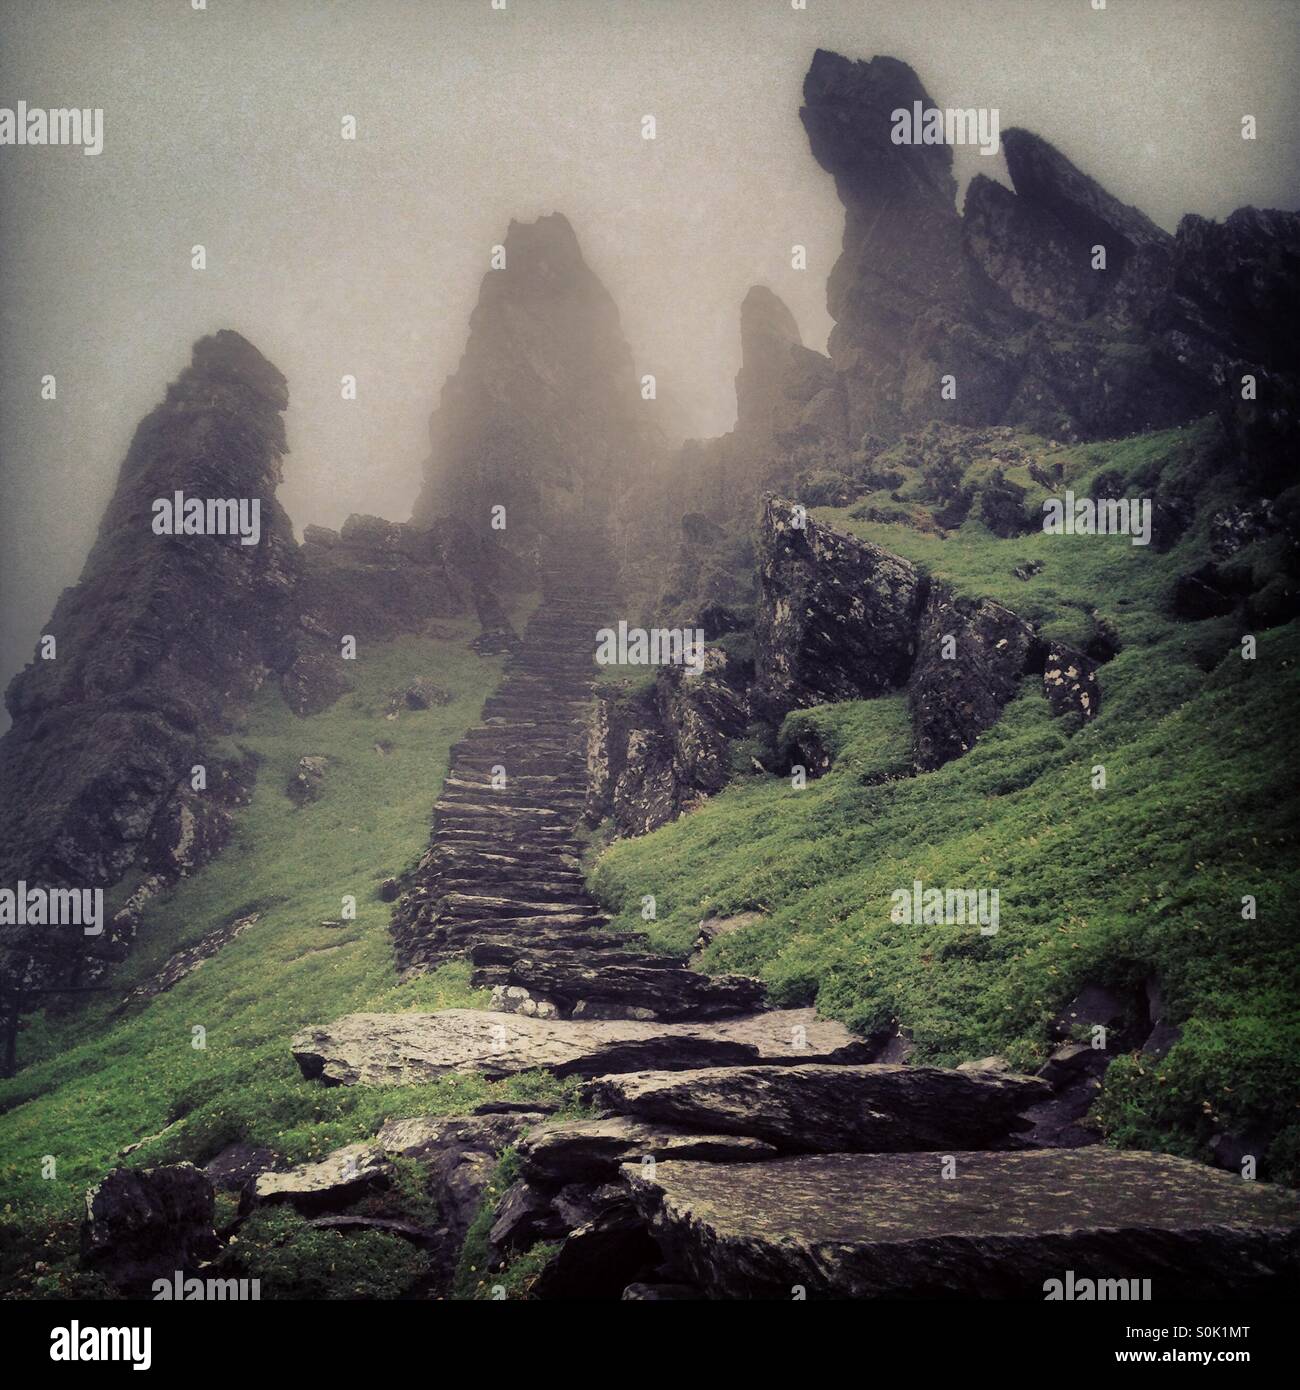 Stairway of Skellig Michael. Skellig Michael is the larger of the two Skellig Islands located 11.6 km west of the Iveragh Peninsula in County Kerry, Ireland. Stock Photo